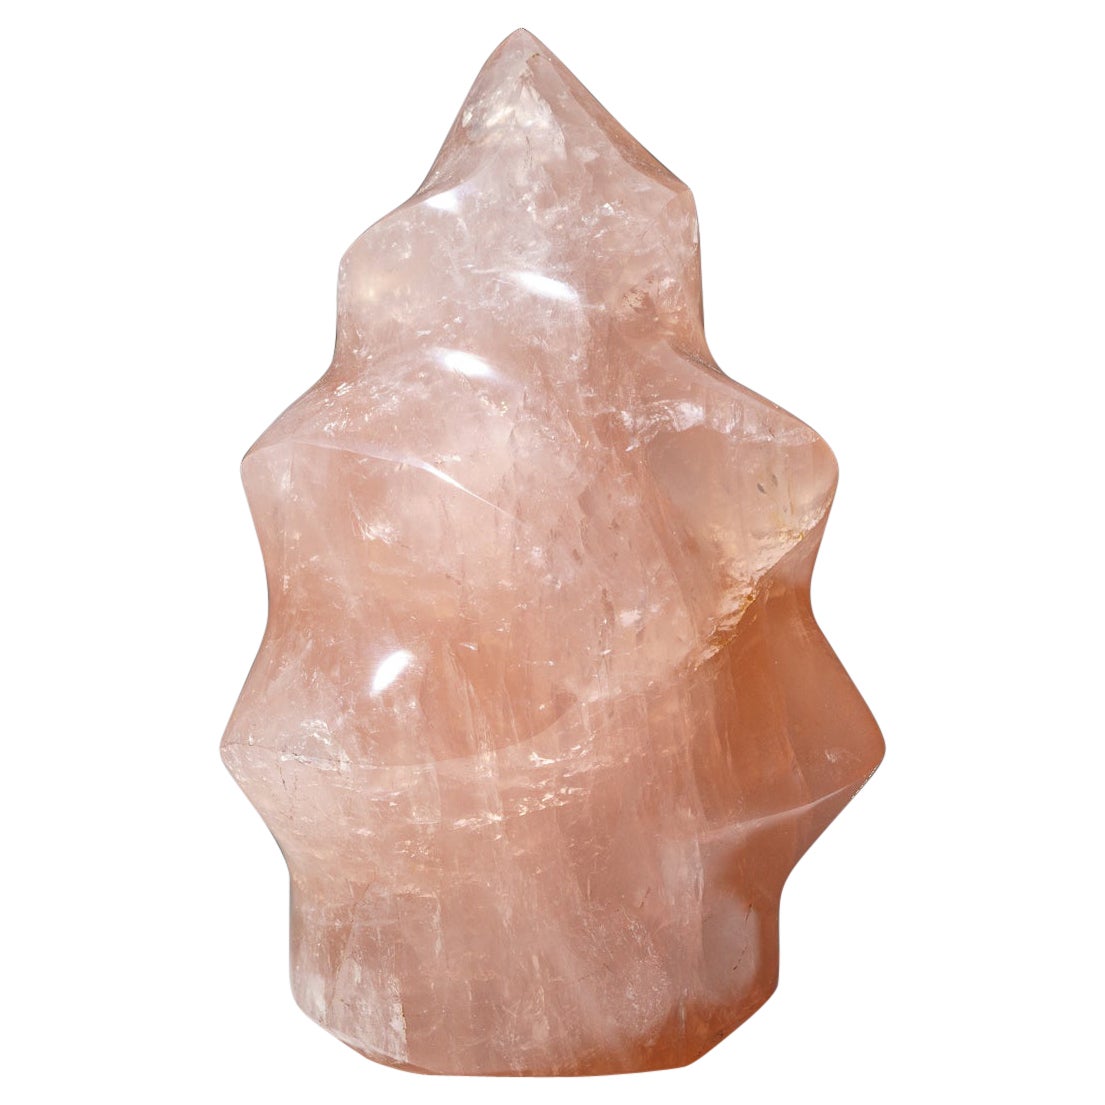 Polished Rose Quartz Flame Freeform From Brazil (7.2 lbs) For Sale